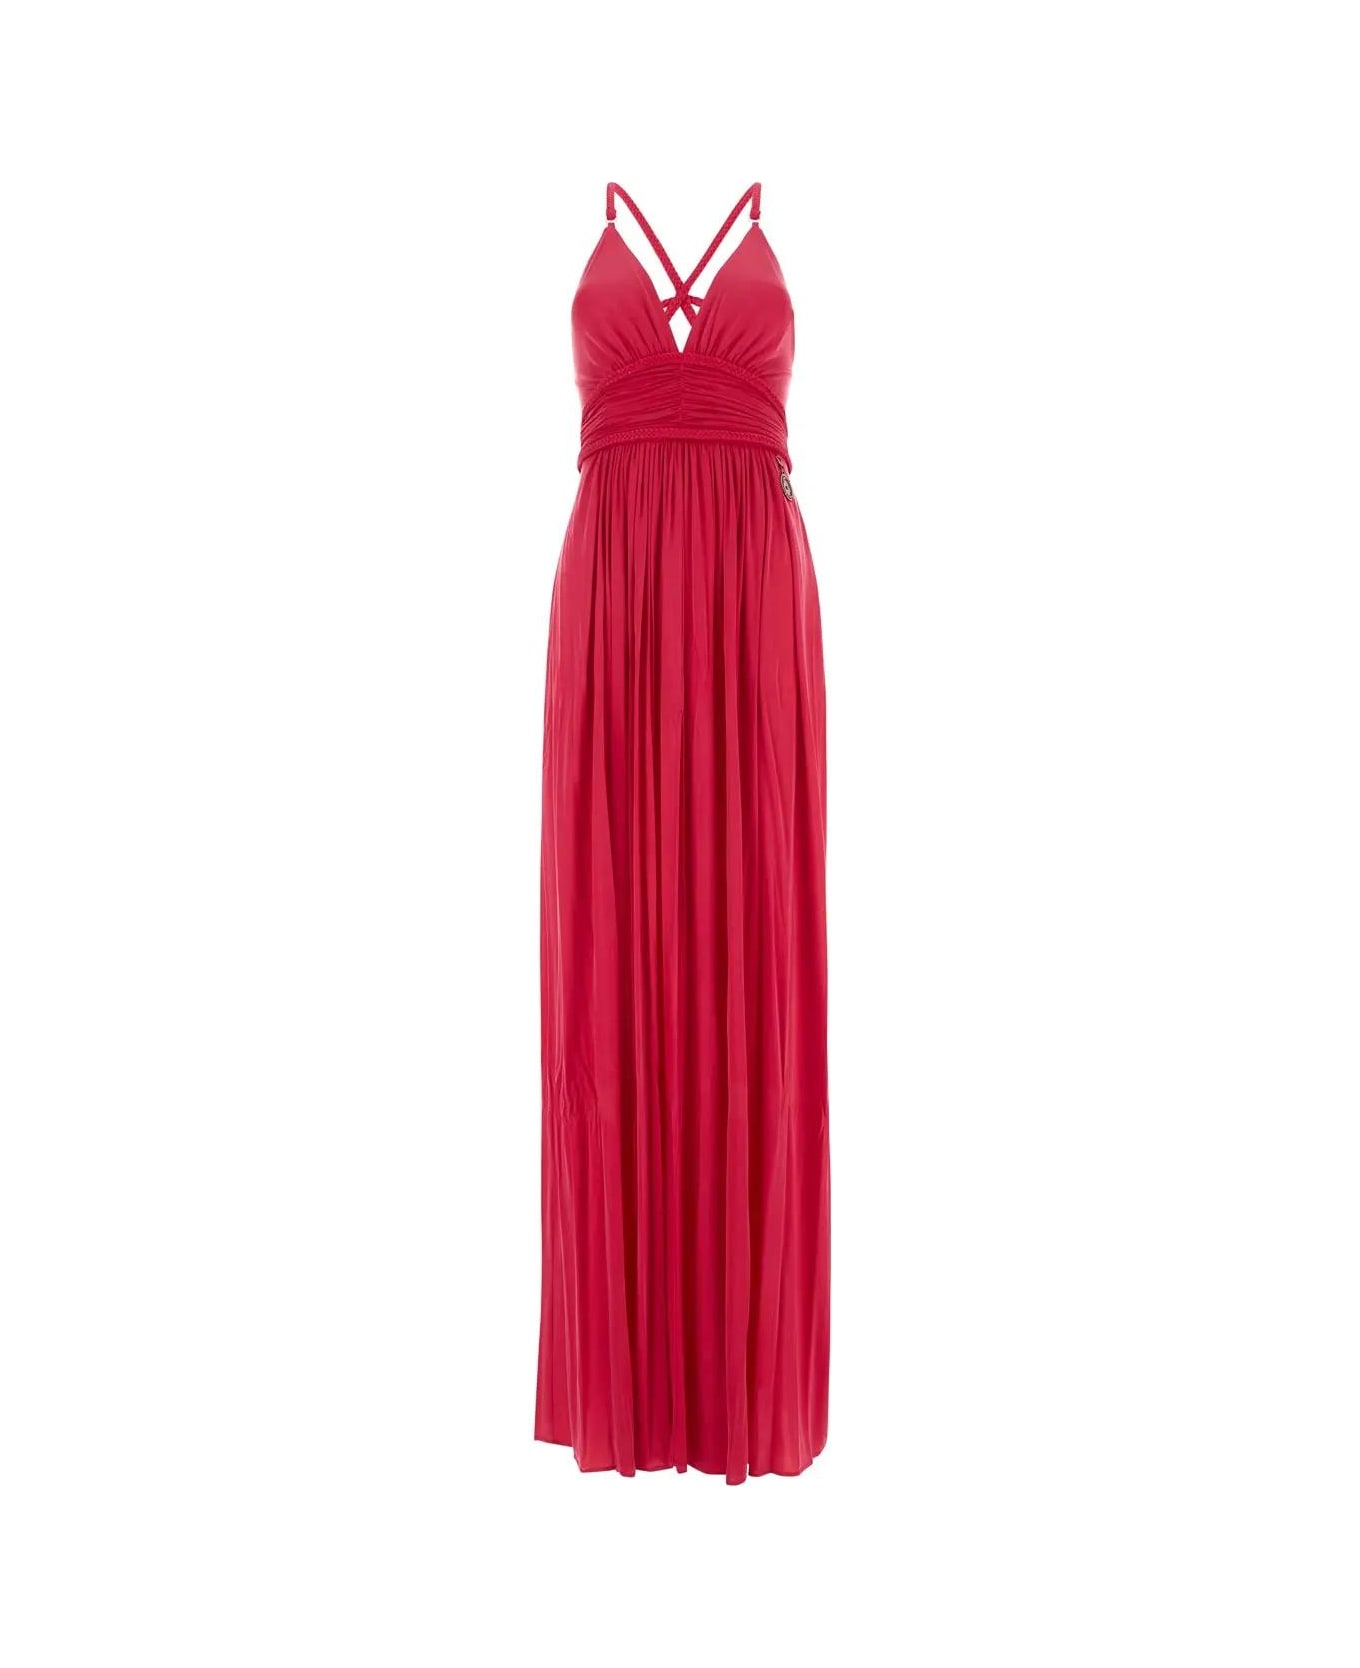 Elisabetta Franchi Red Carpet Dress With Intertwined Straps - PINK ワンピース＆ドレス